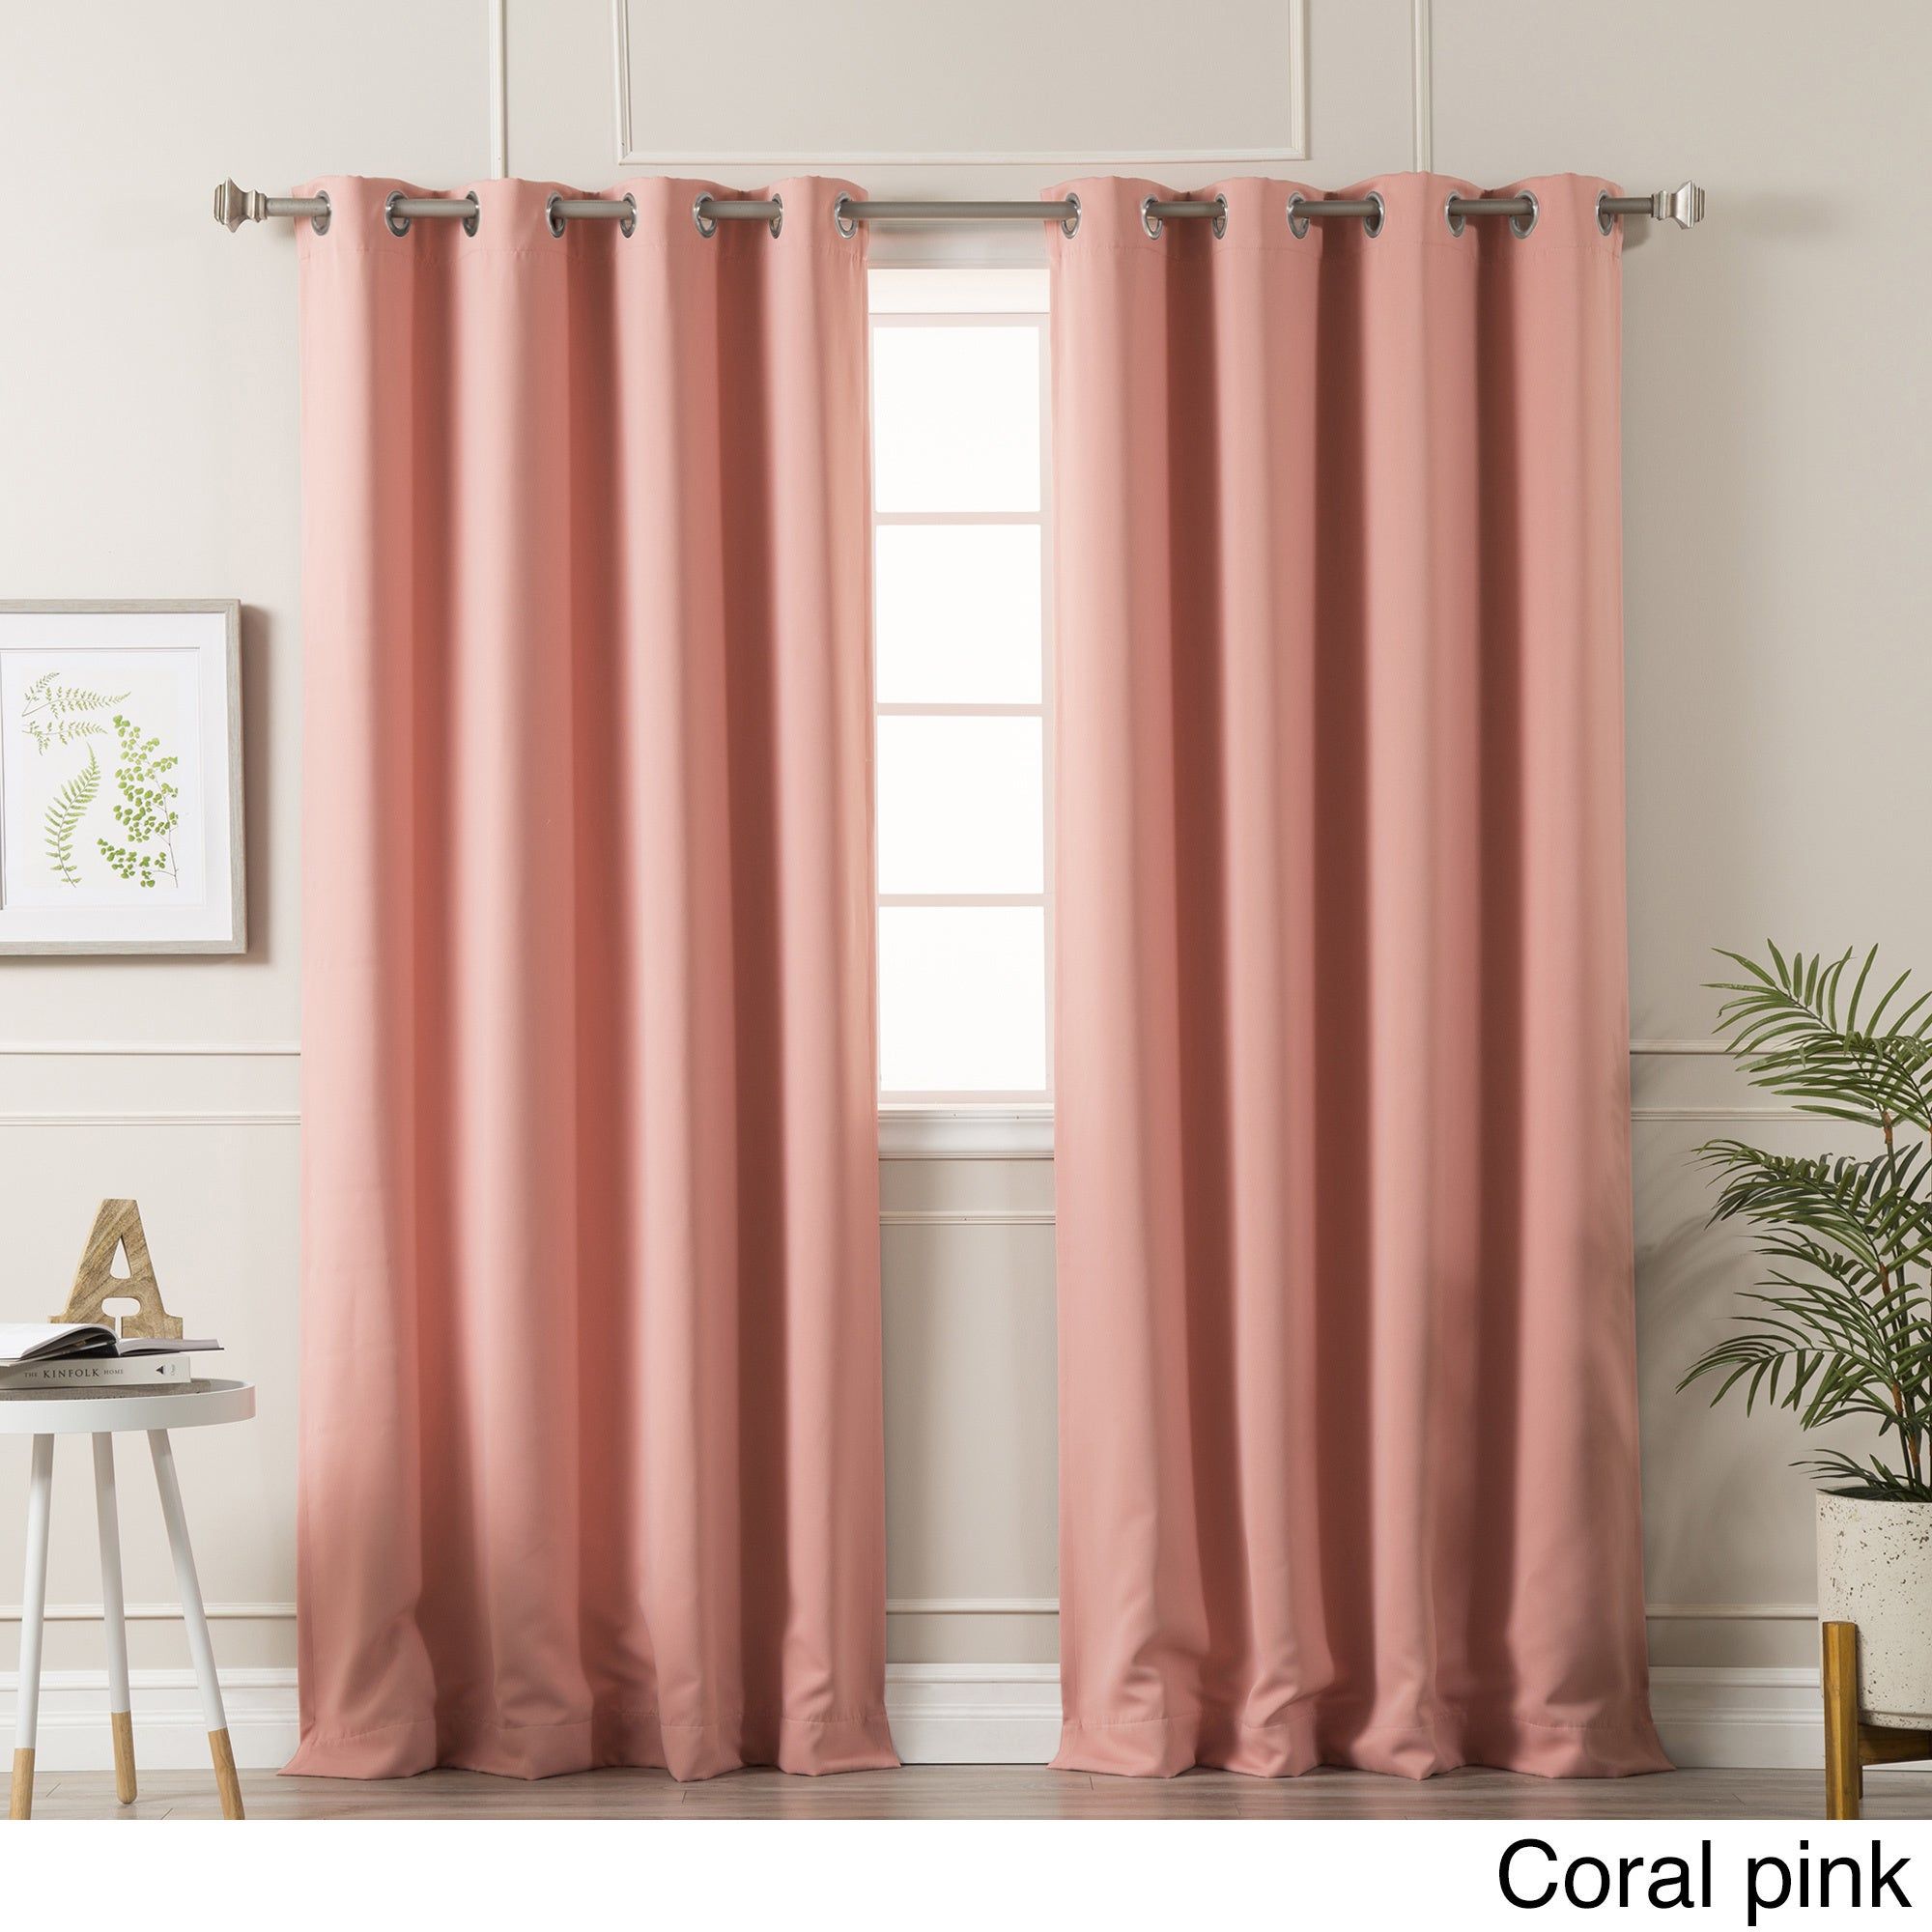 Aurora Home Silvertone Grommet Top Thermal Insulated Blackout Curtain Panel  Pair With Regard To Thermal Insulated Blackout Curtain Pairs (View 24 of 30)